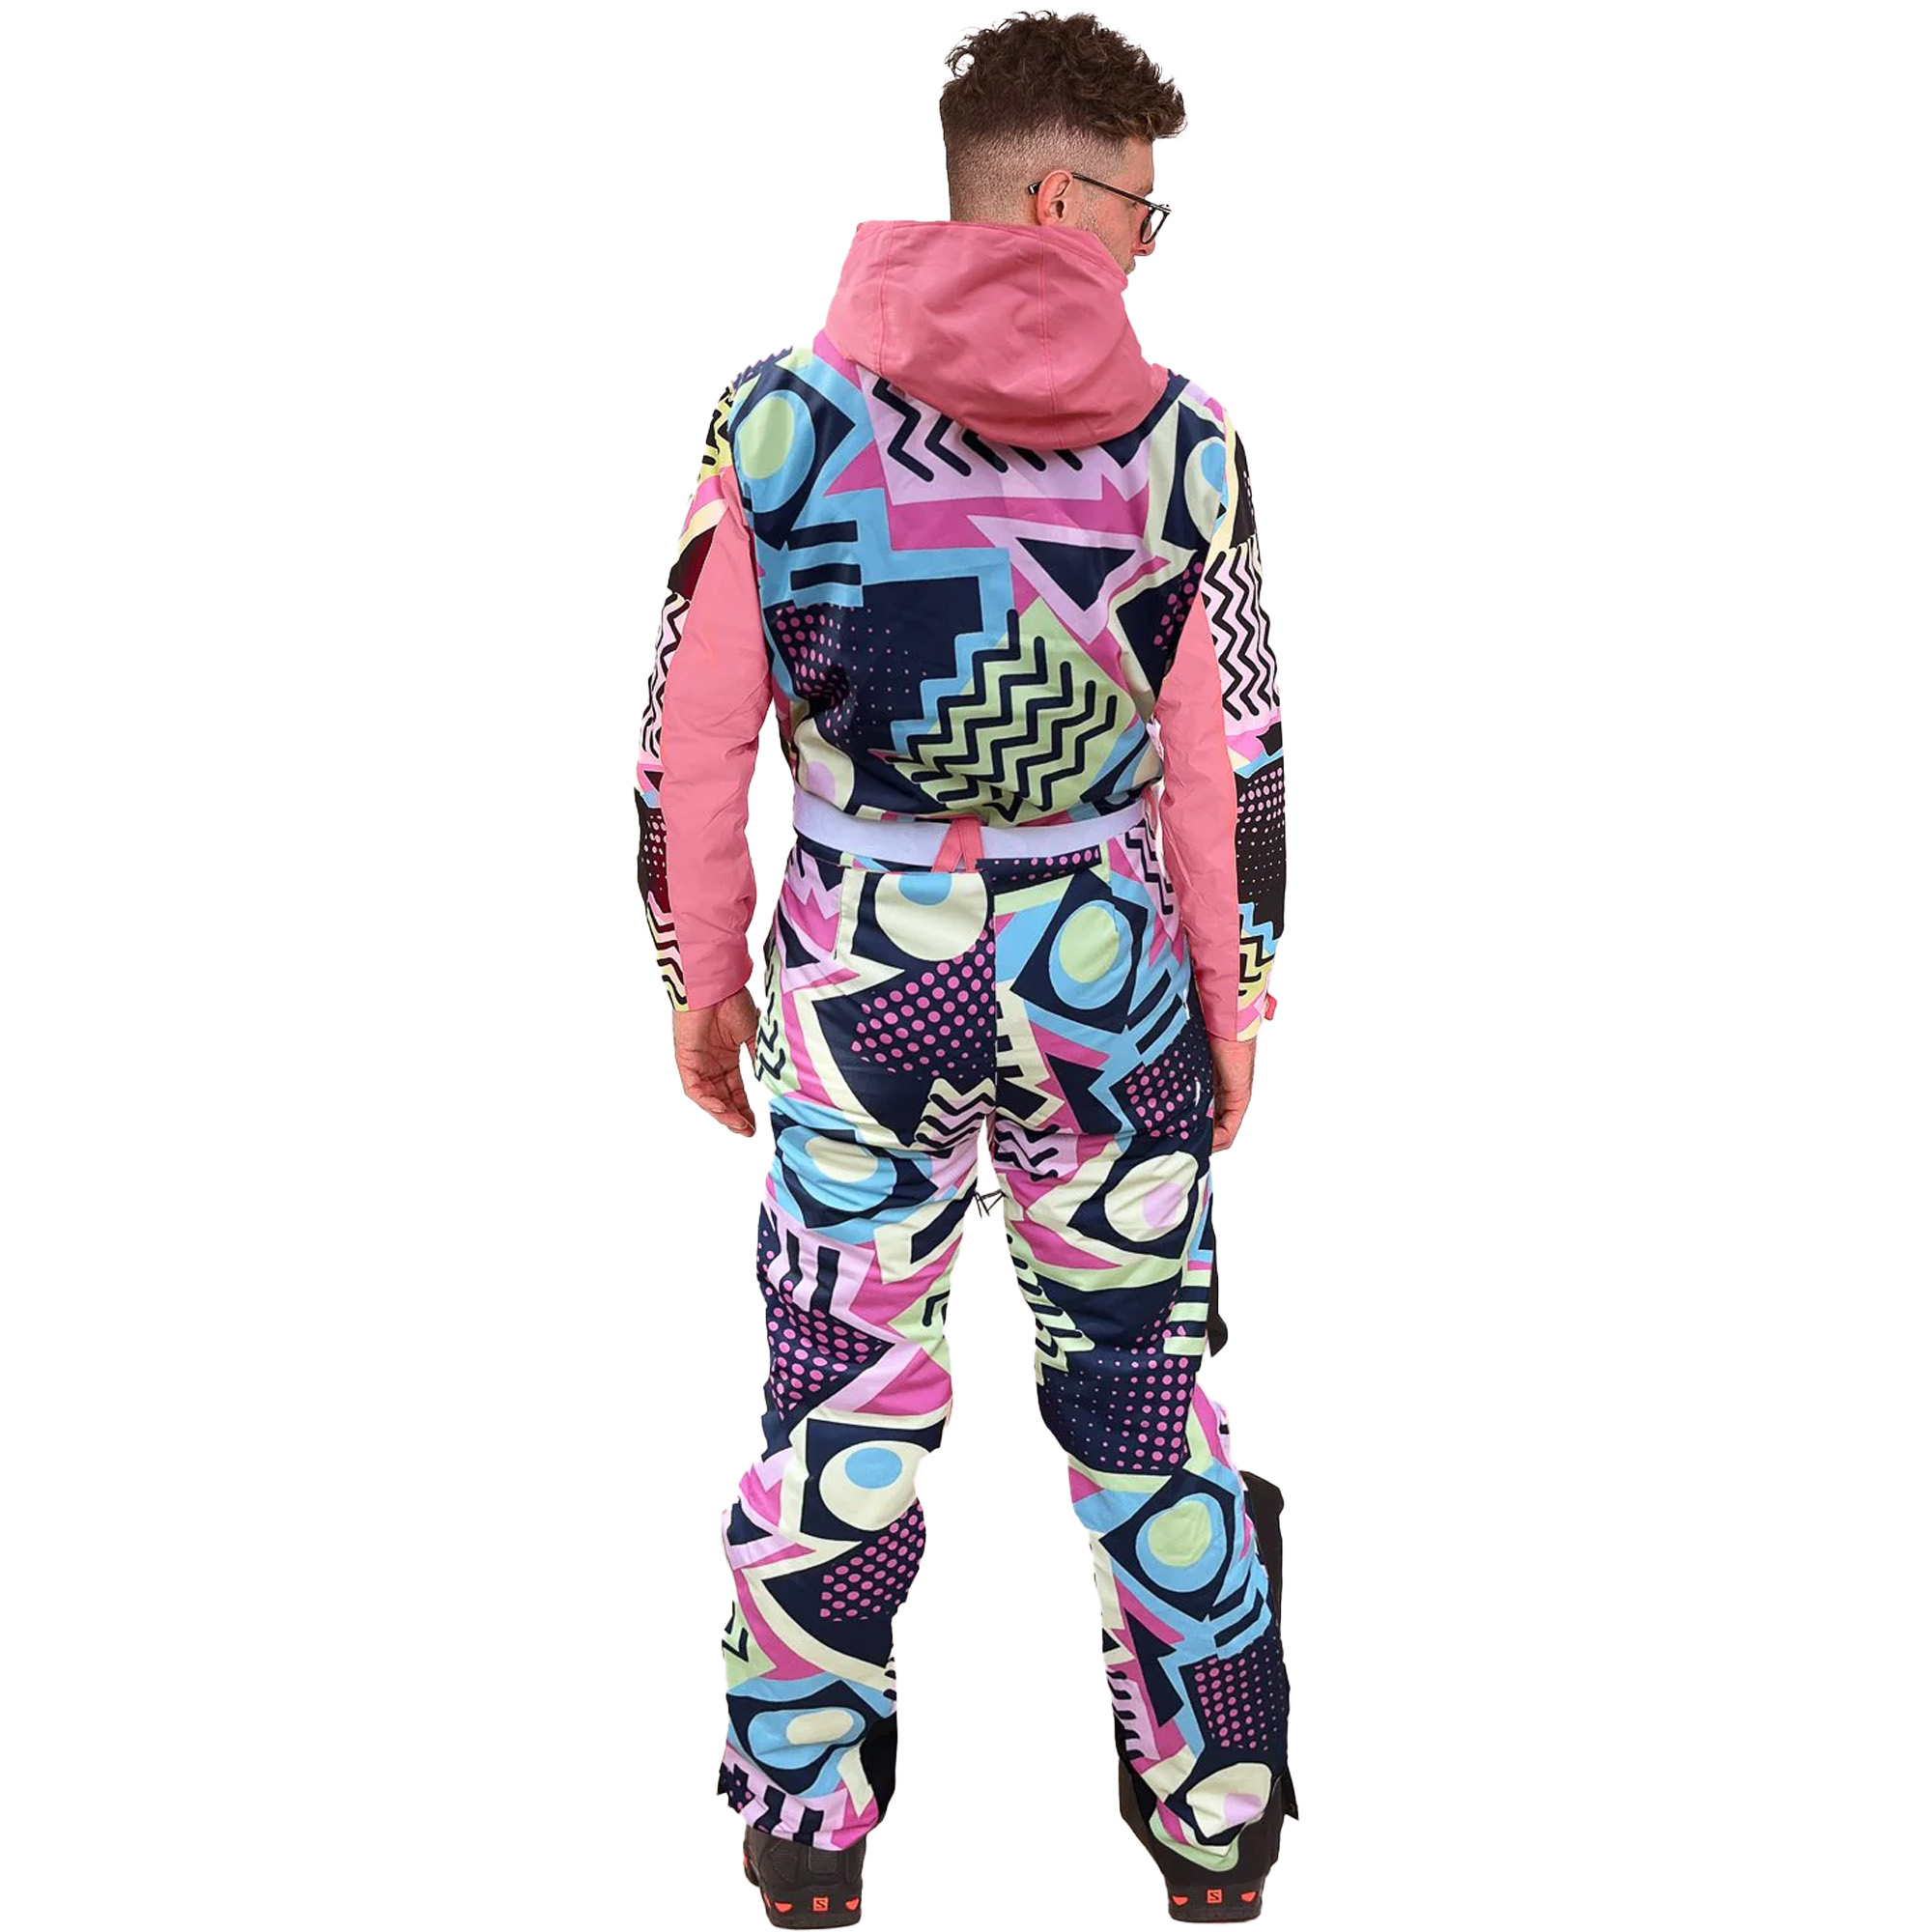 OOSC Saved By The Bell Unisex One Piece Ski Suit